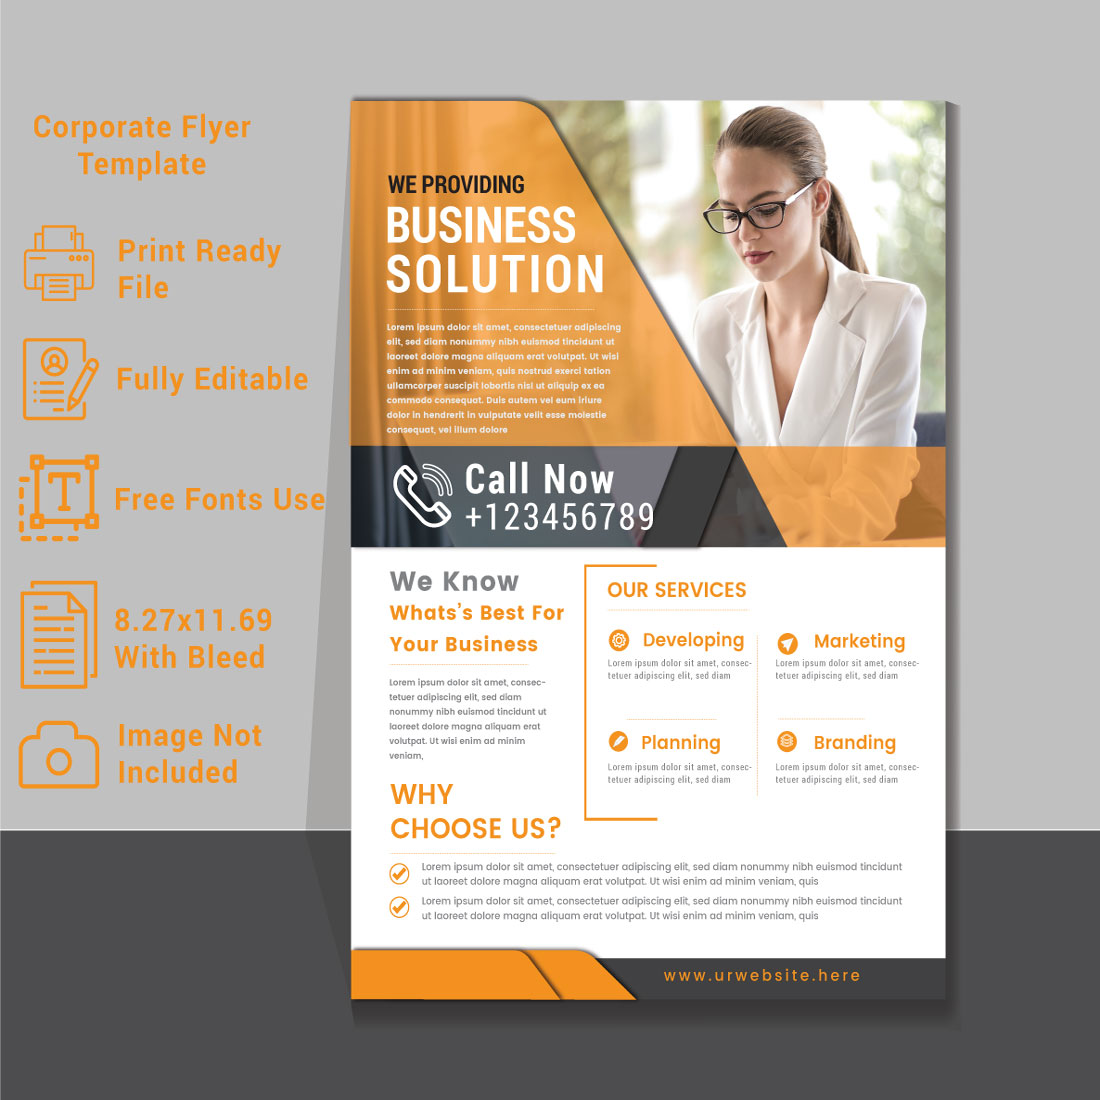 3 Corporate Flyer Template for your Business Corporate Flyer Design Template stock illustration preview image.